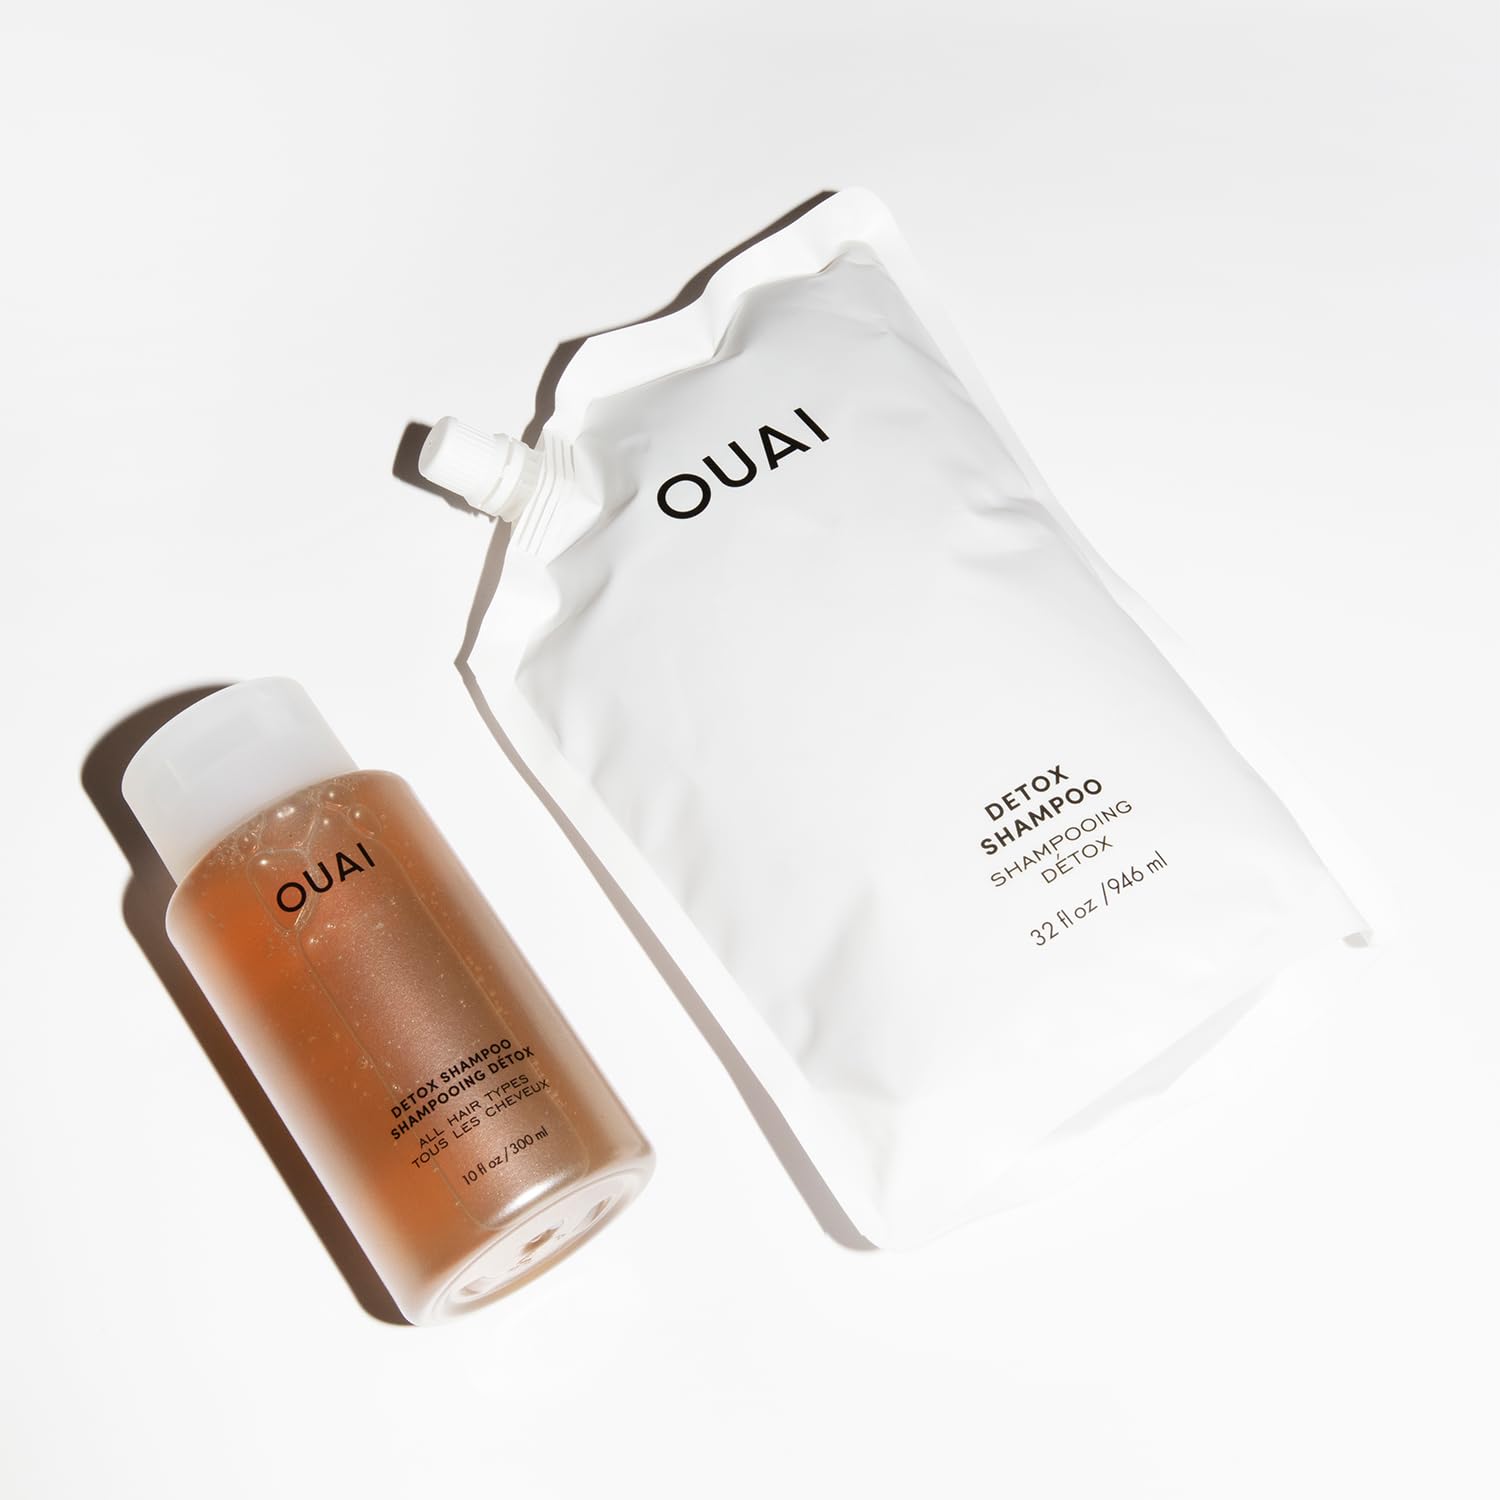 OUAI Detox Shampoo - Clarifying Shampoo for Build Up, Dirt, Oil, Product and Hard Water - Apple Cider Vinegar & Keratin for Clean, Refreshed Hair - Sulfate-Free Hair Care (16 oz) : Beauty & Personal Care